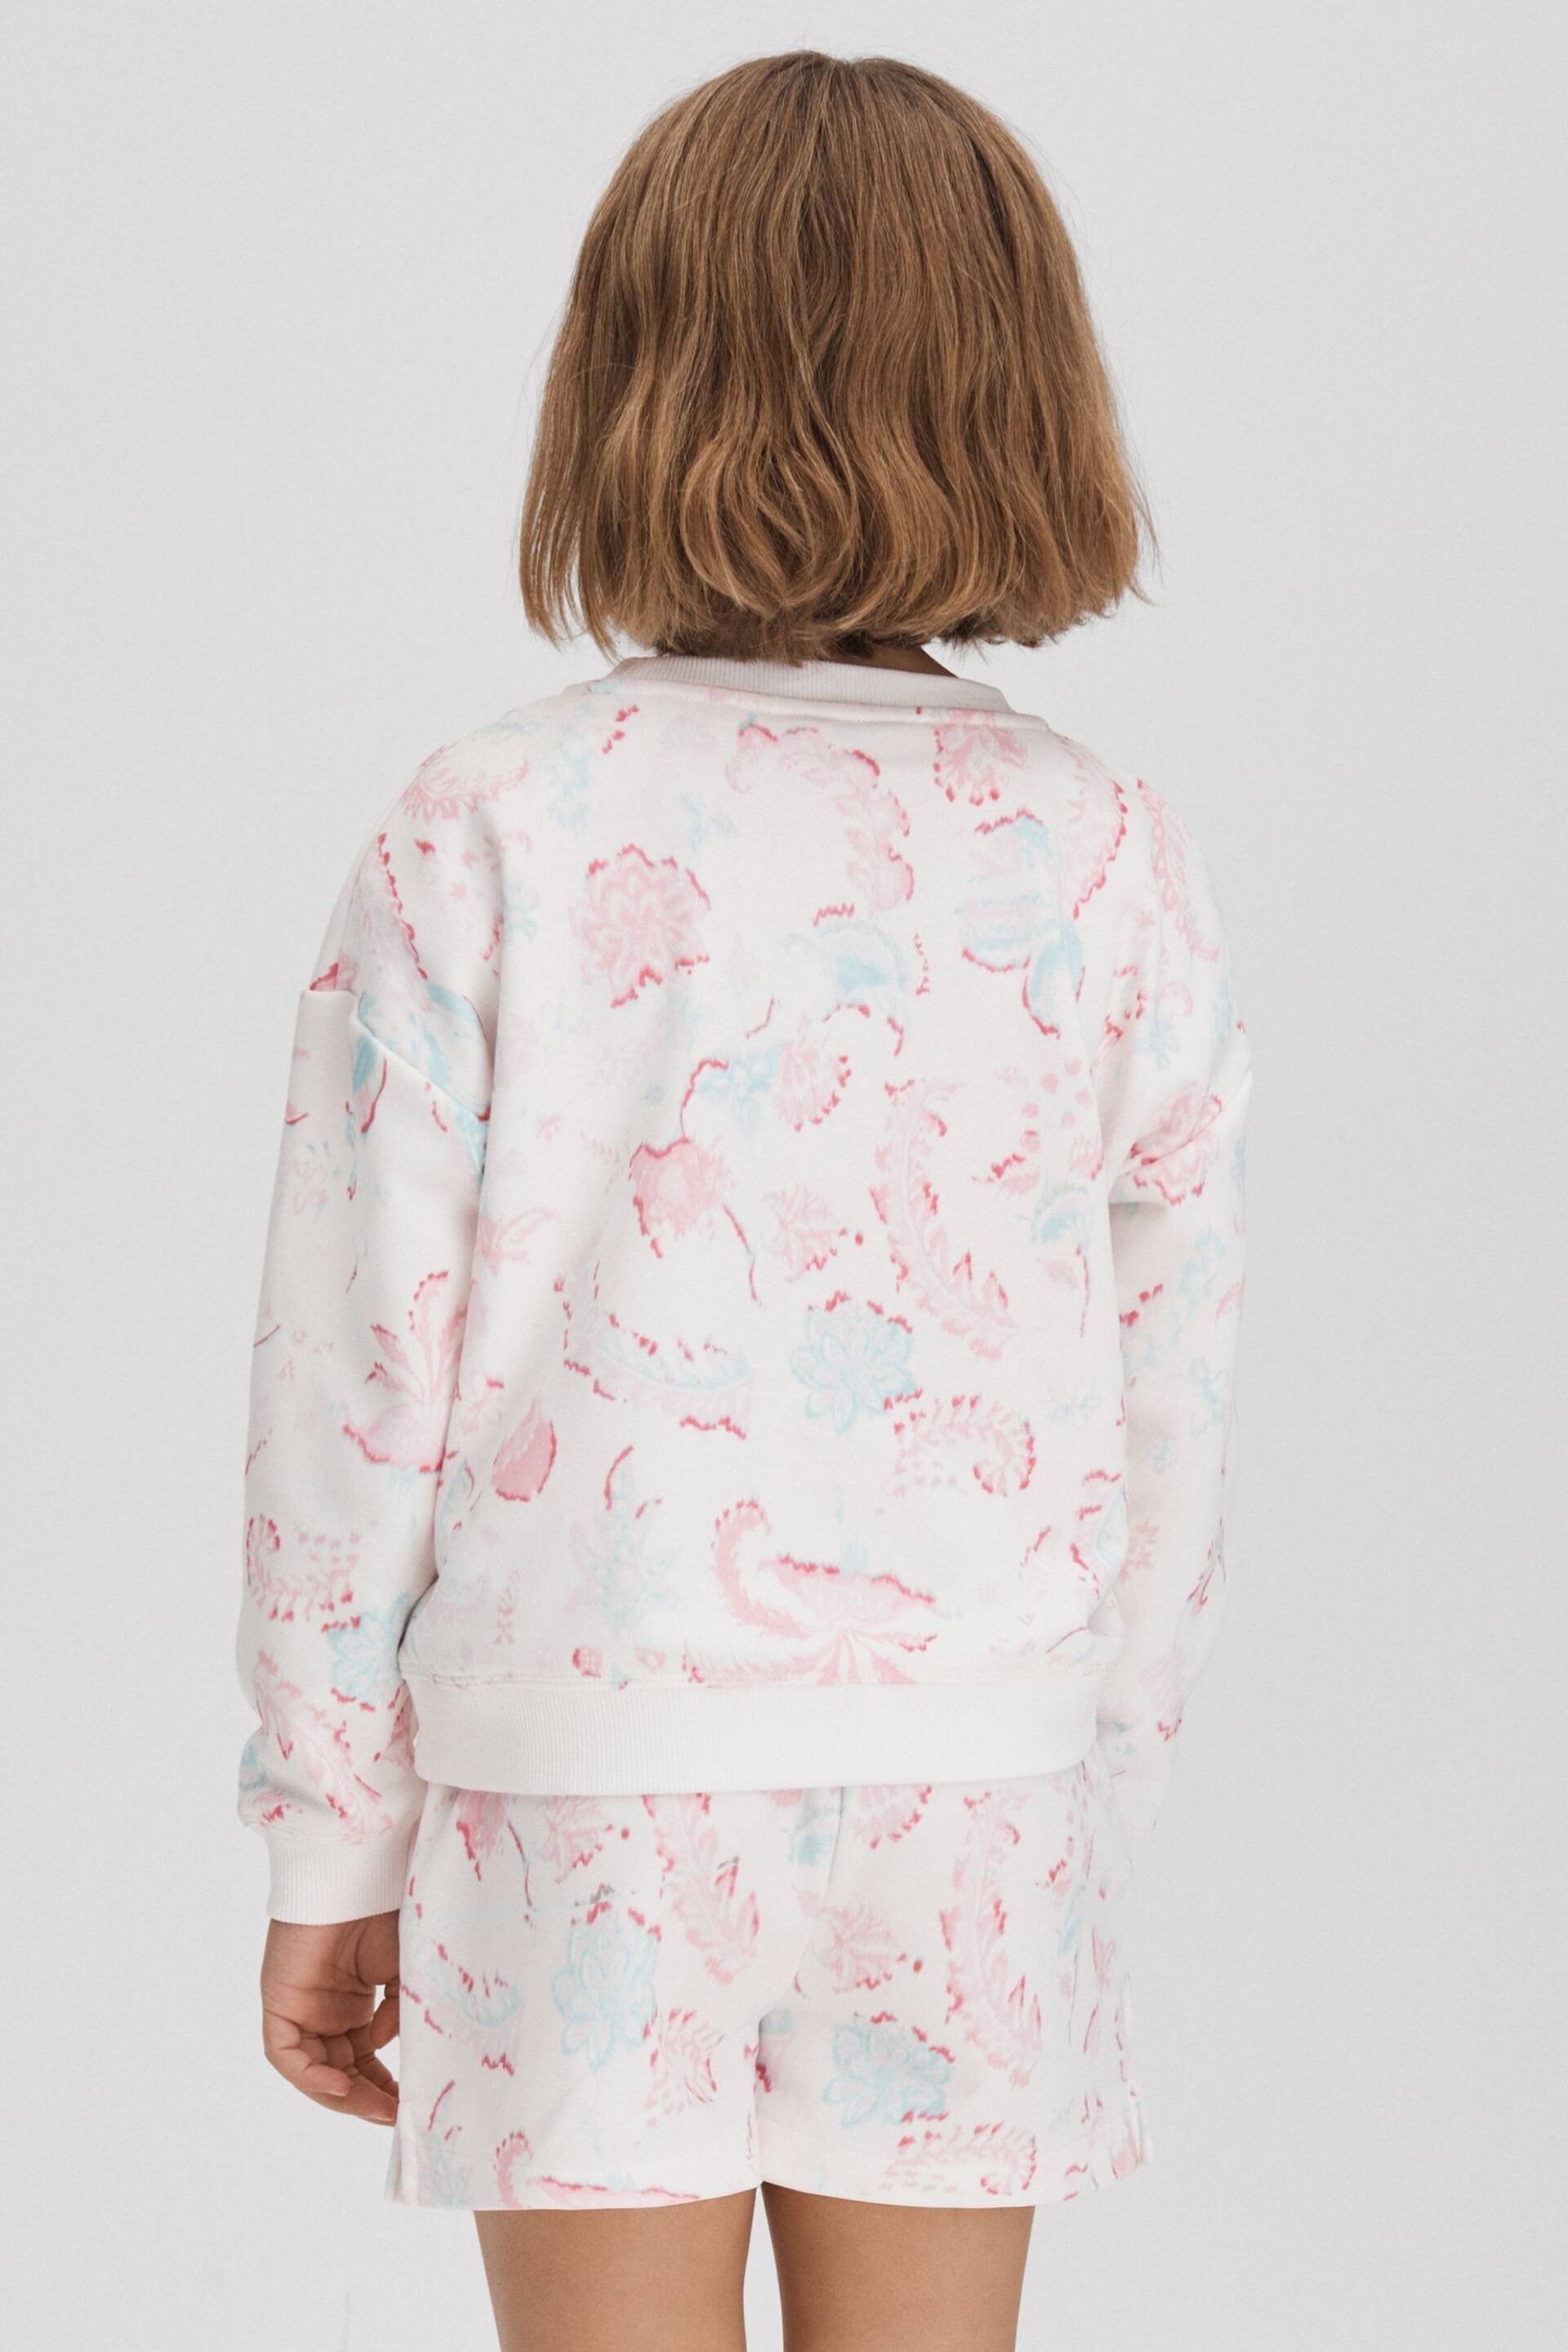 Reiss Pink Jessie Teen Crew Neck Jumper and Shorts Set - Image 6 of 7